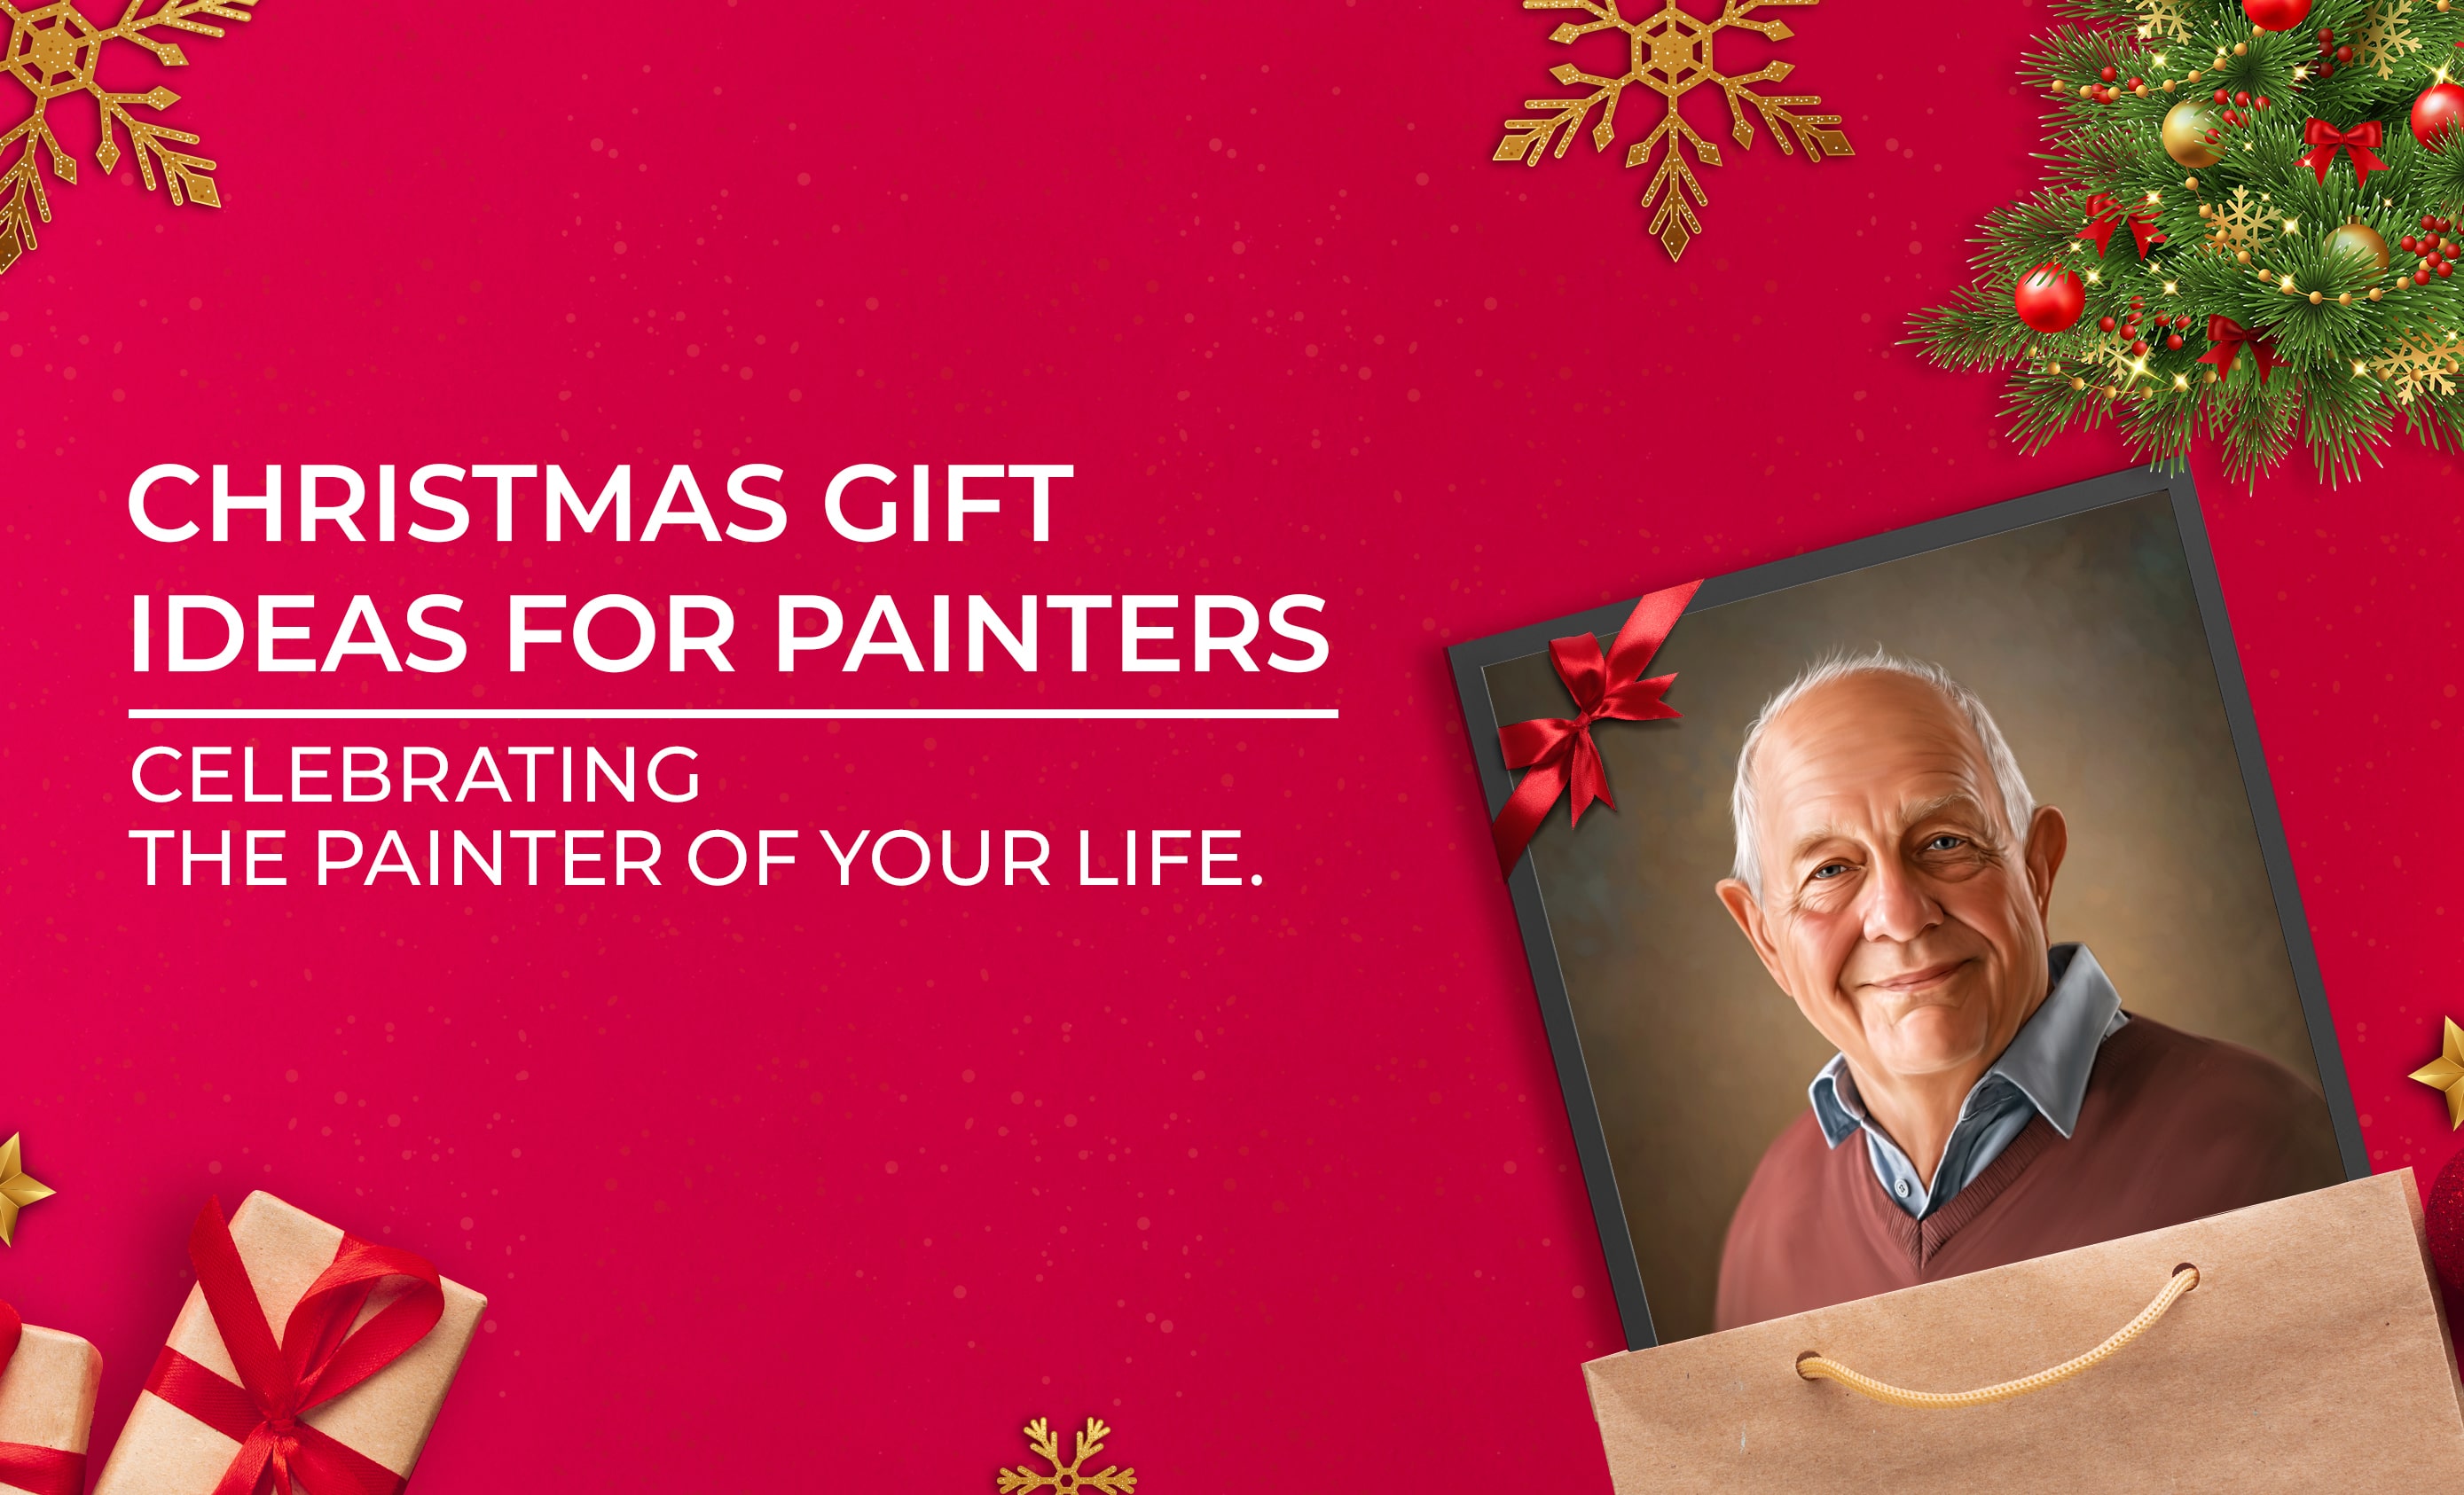 Christmas gift ideas for painters